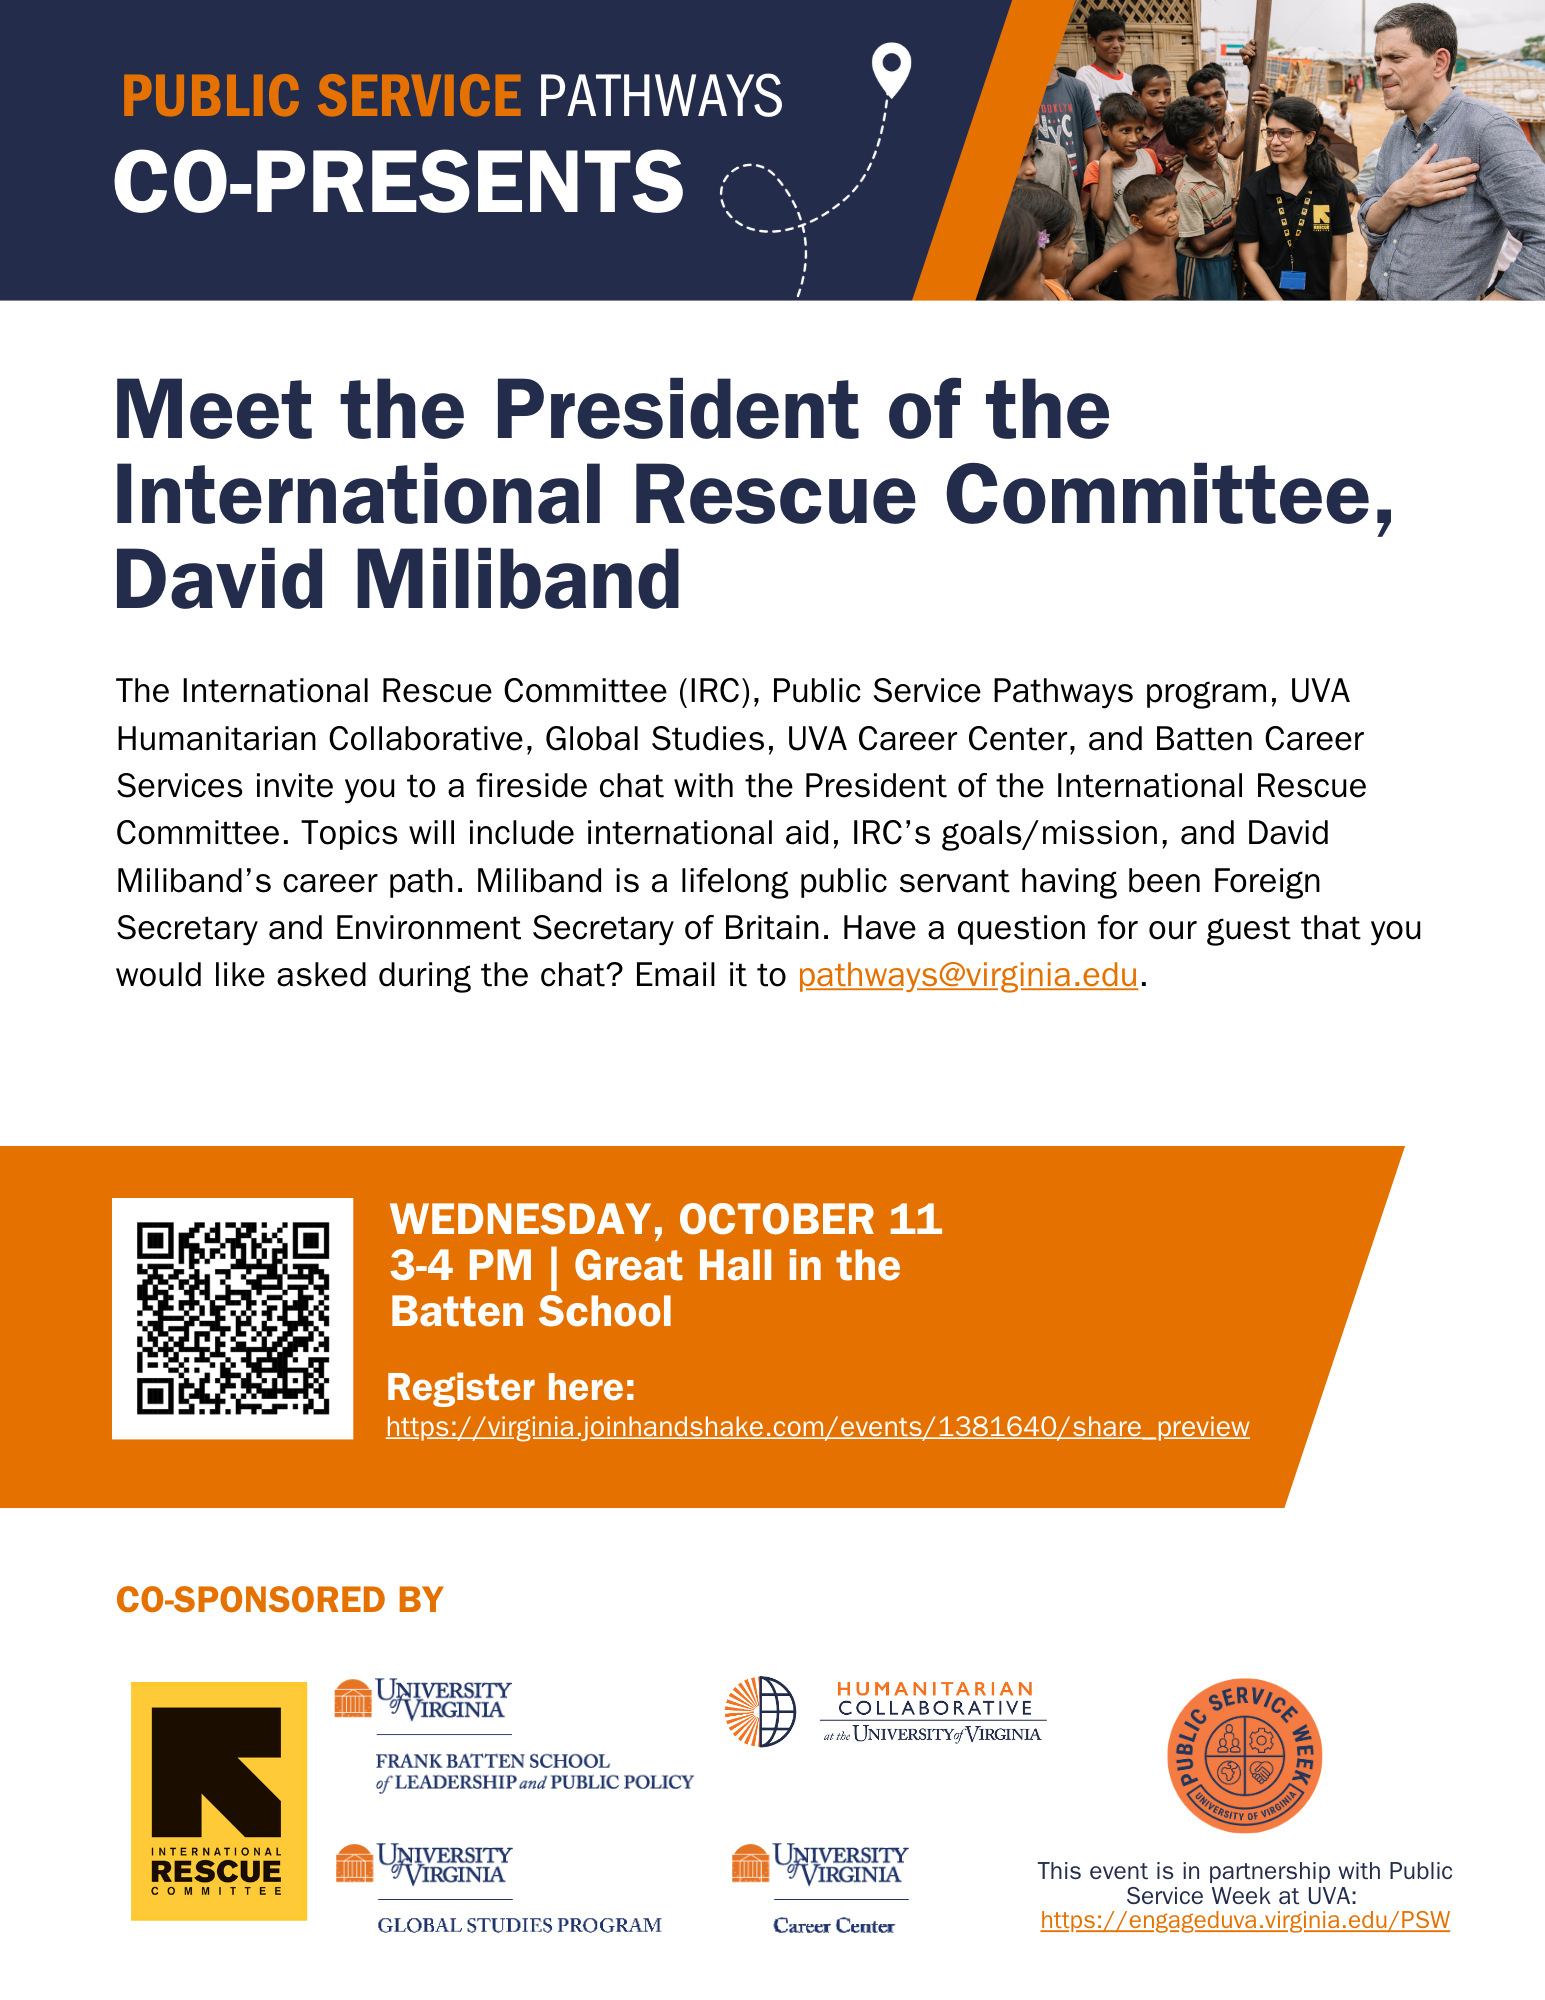 Meet the President of the International Rescue Committee